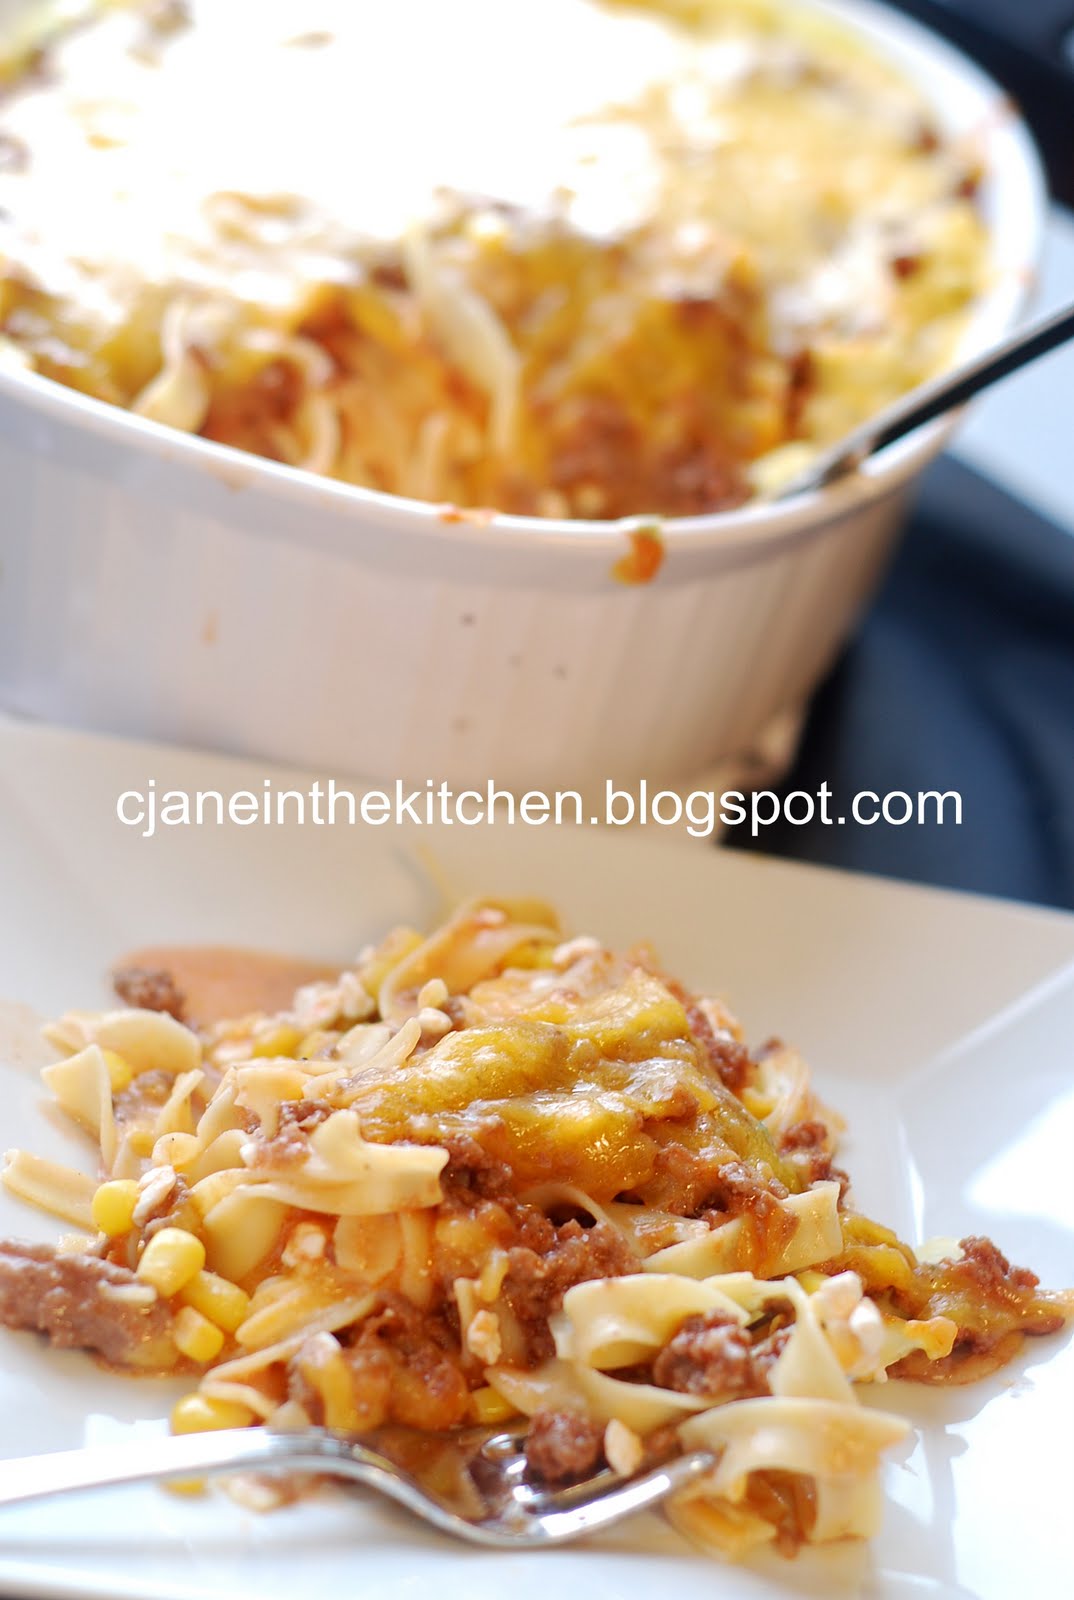 See Jane in the kitchen: Sour Cream Noodle Bake